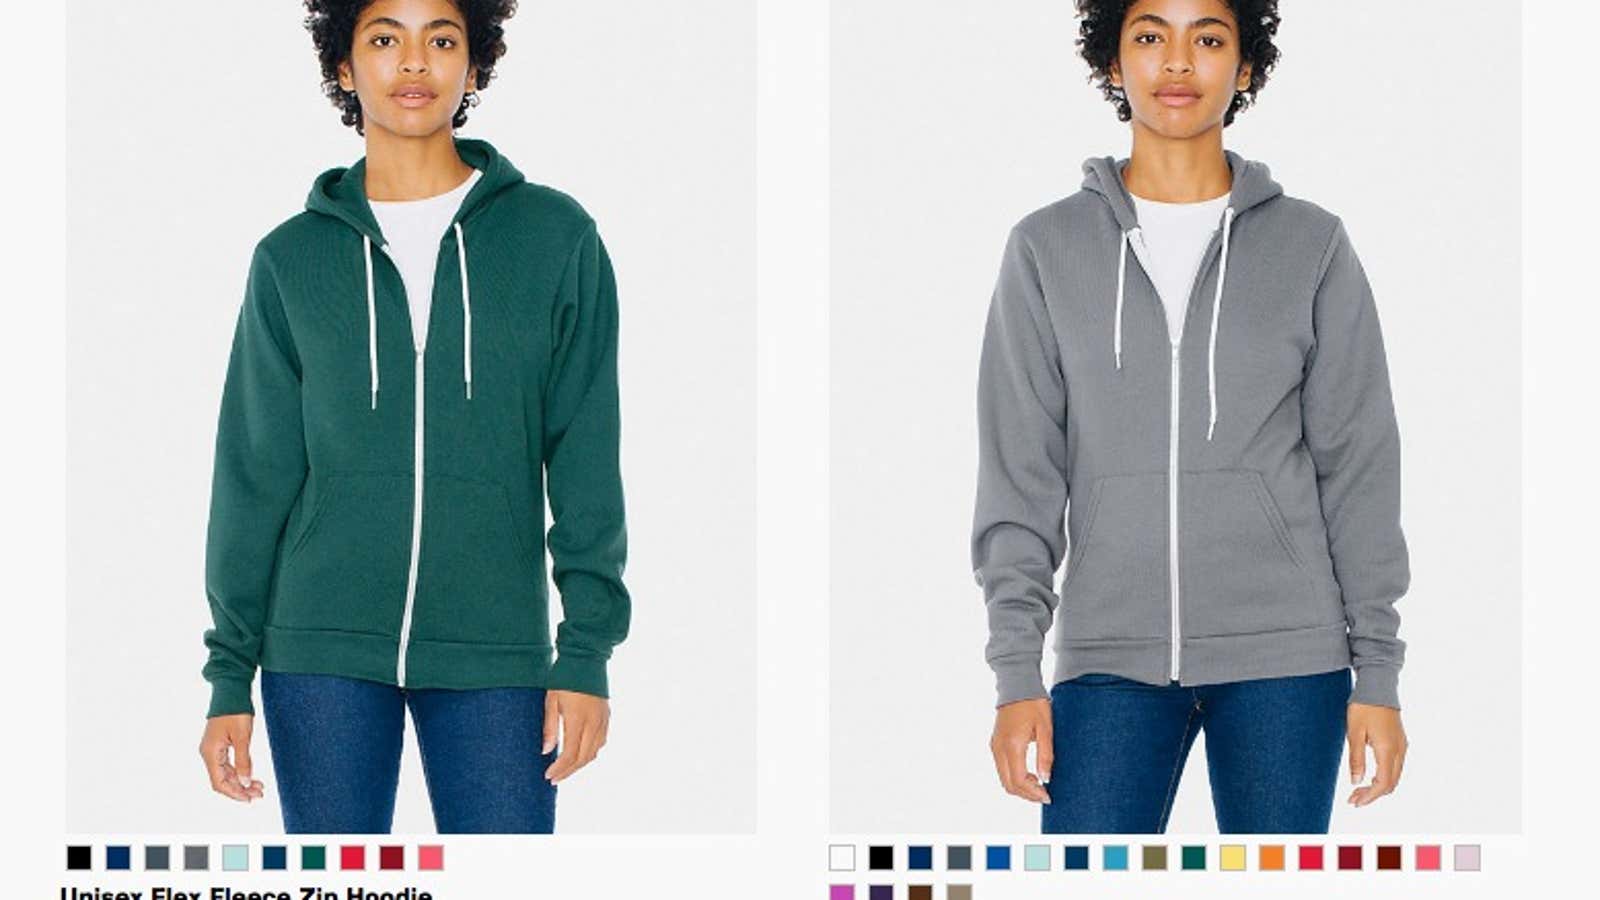 Is the hoodie on the left worth $10 more?